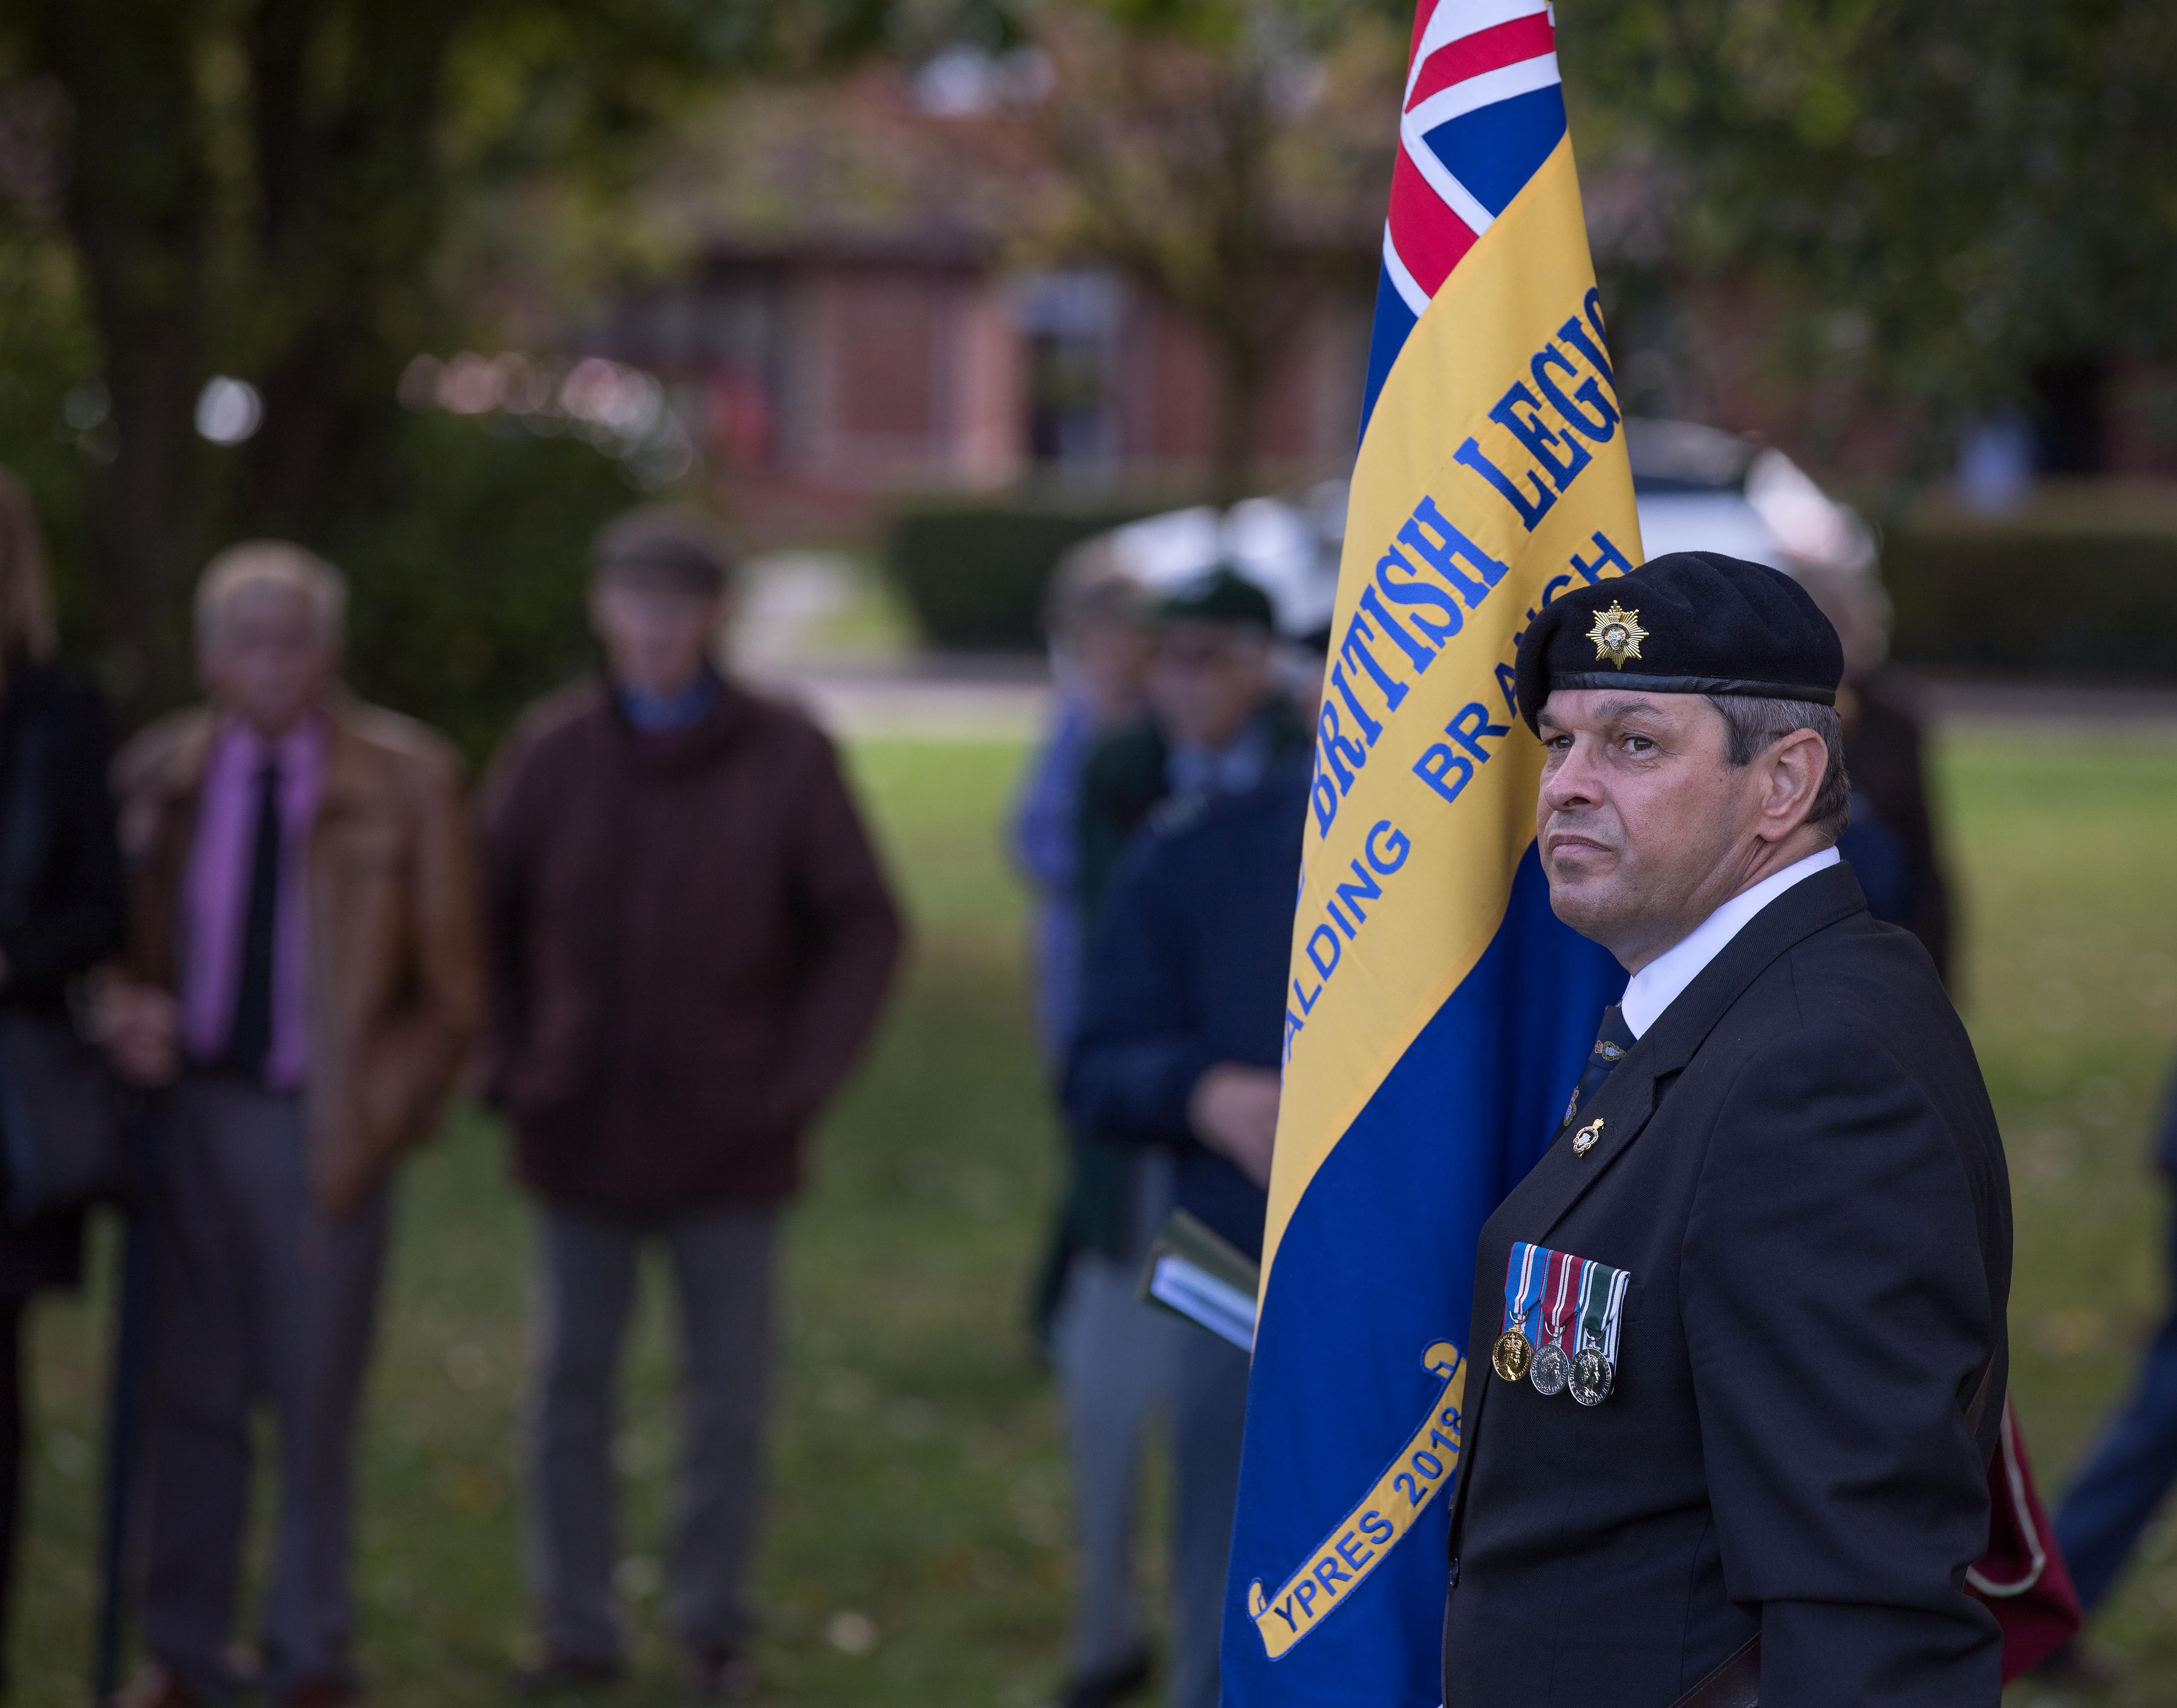 Personnel stands with British Legion flag.